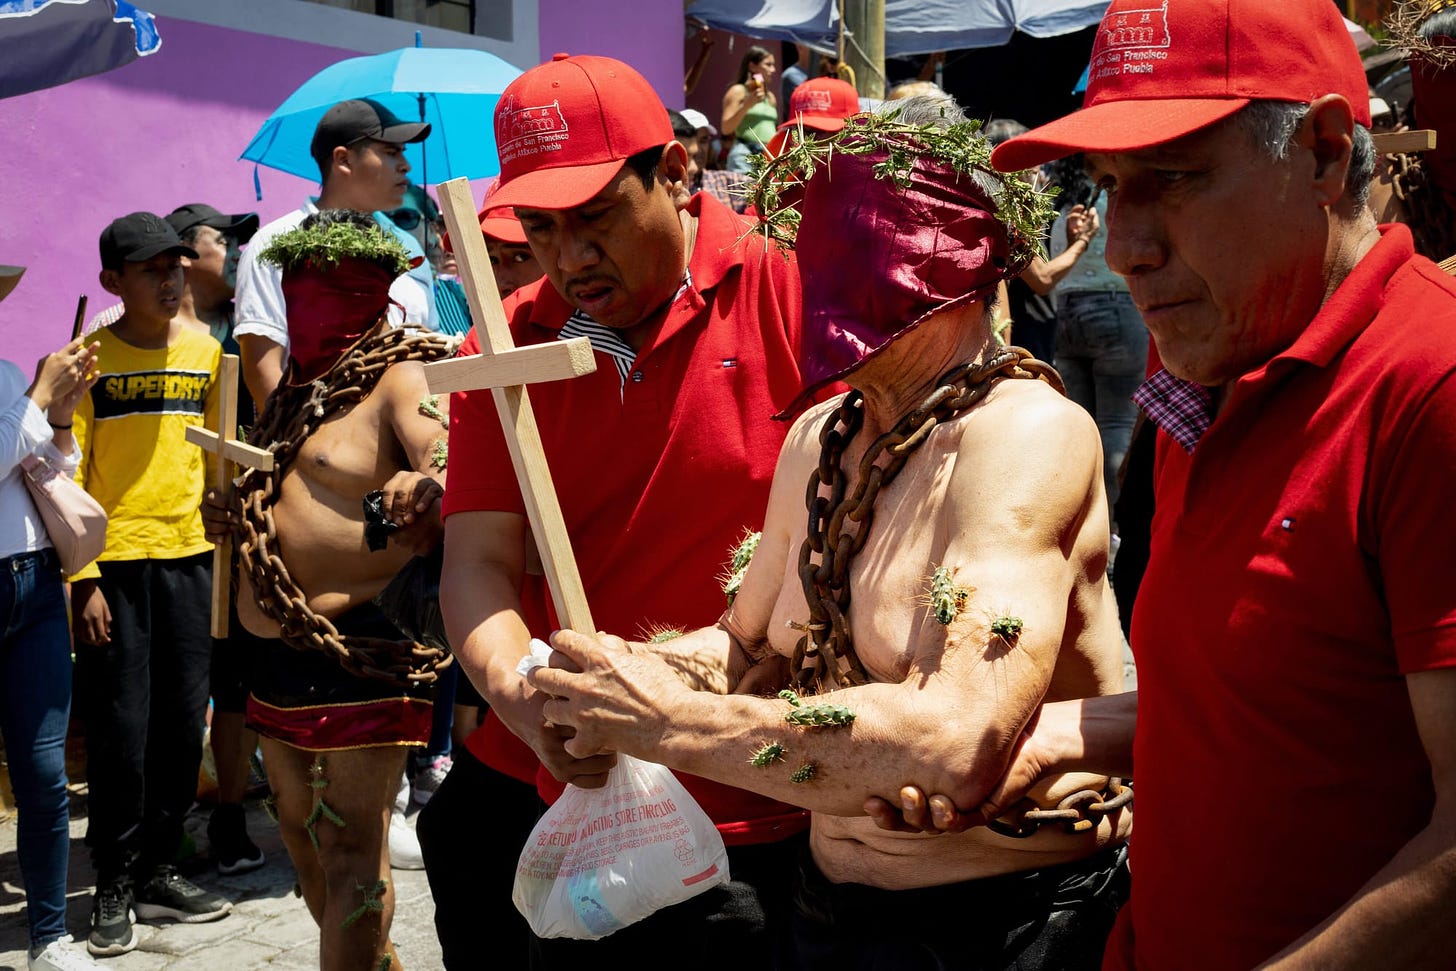 Los Engrillados of Atlixco: Mexican men in shackles with cacti stuck in their skin walk in pain to wash away their sins